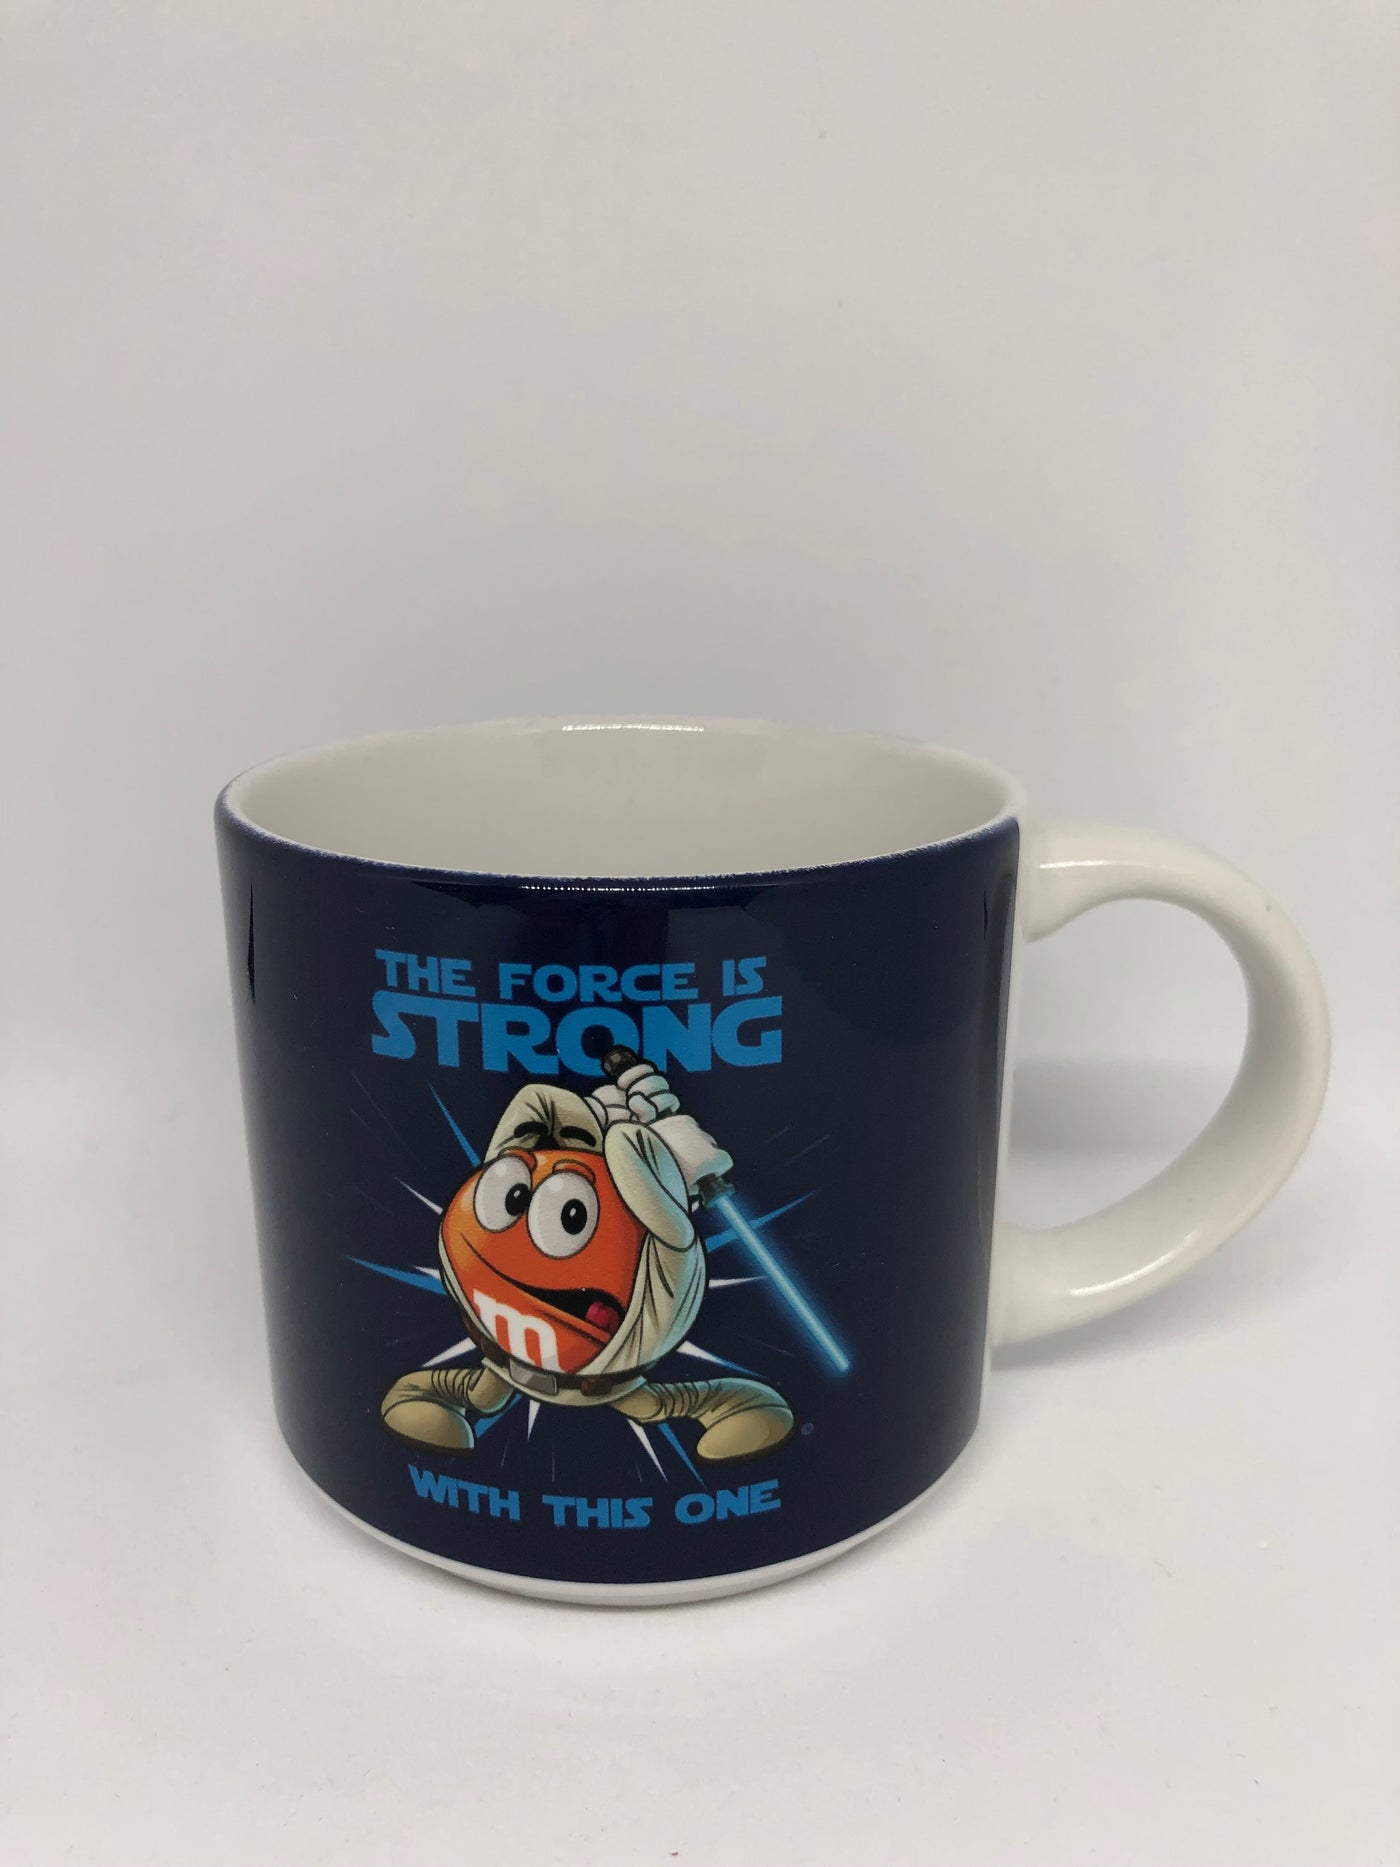 M&M's World Orange Star Wars the Force is Strong with This One Coffee Mug New